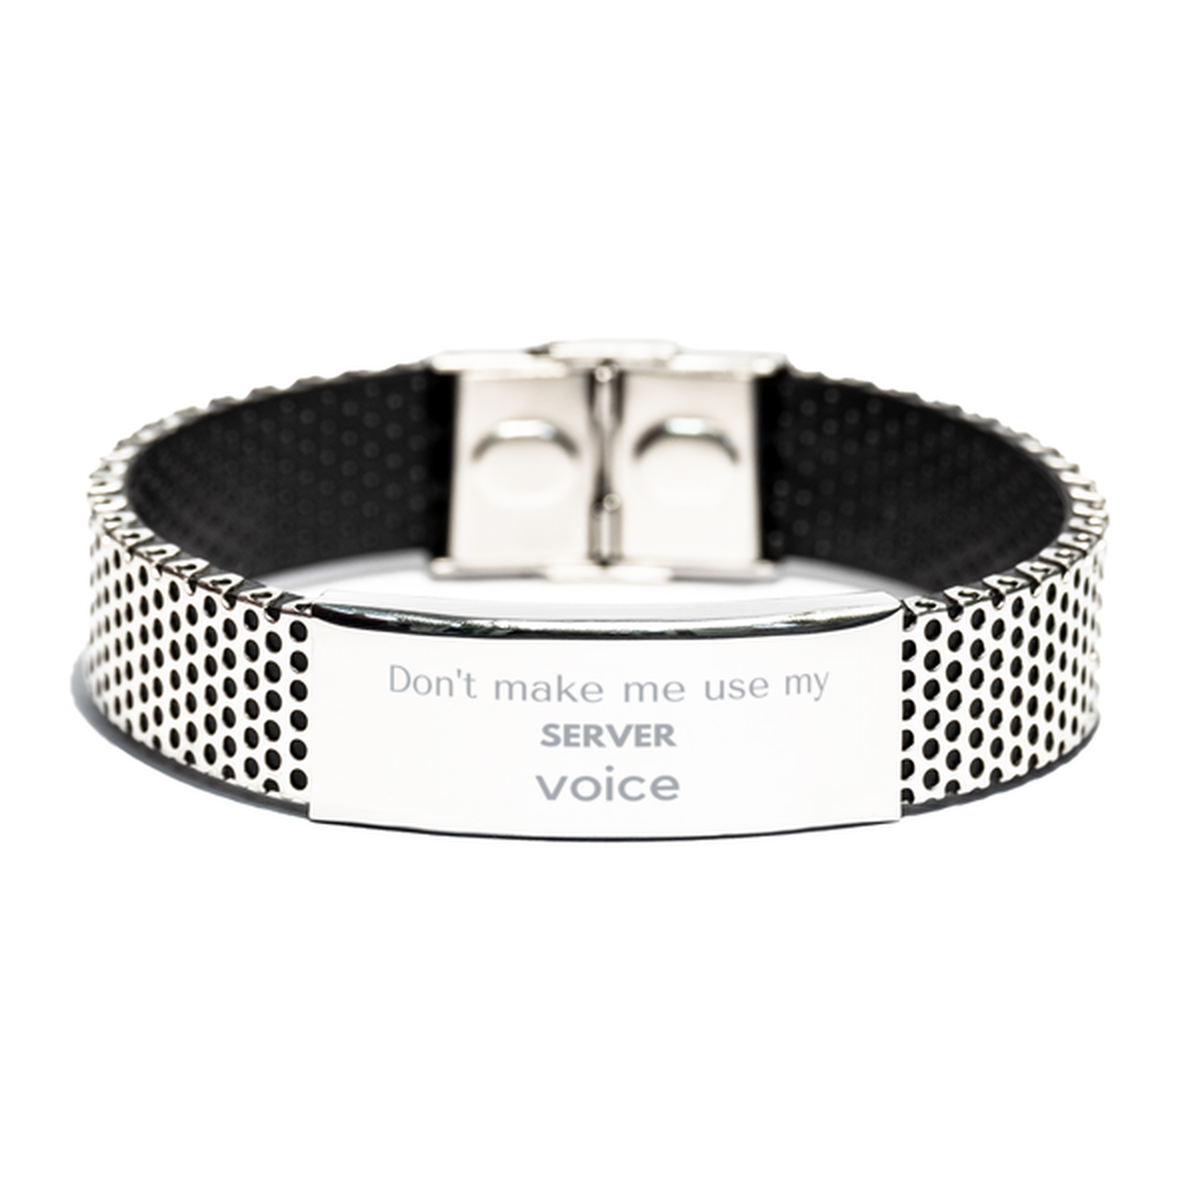 Don't make me use my Server voice, Sarcasm Server Gifts, Christmas Server Stainless Steel Bracelet Birthday Unique Gifts For Server Coworkers, Men, Women, Colleague, Friends